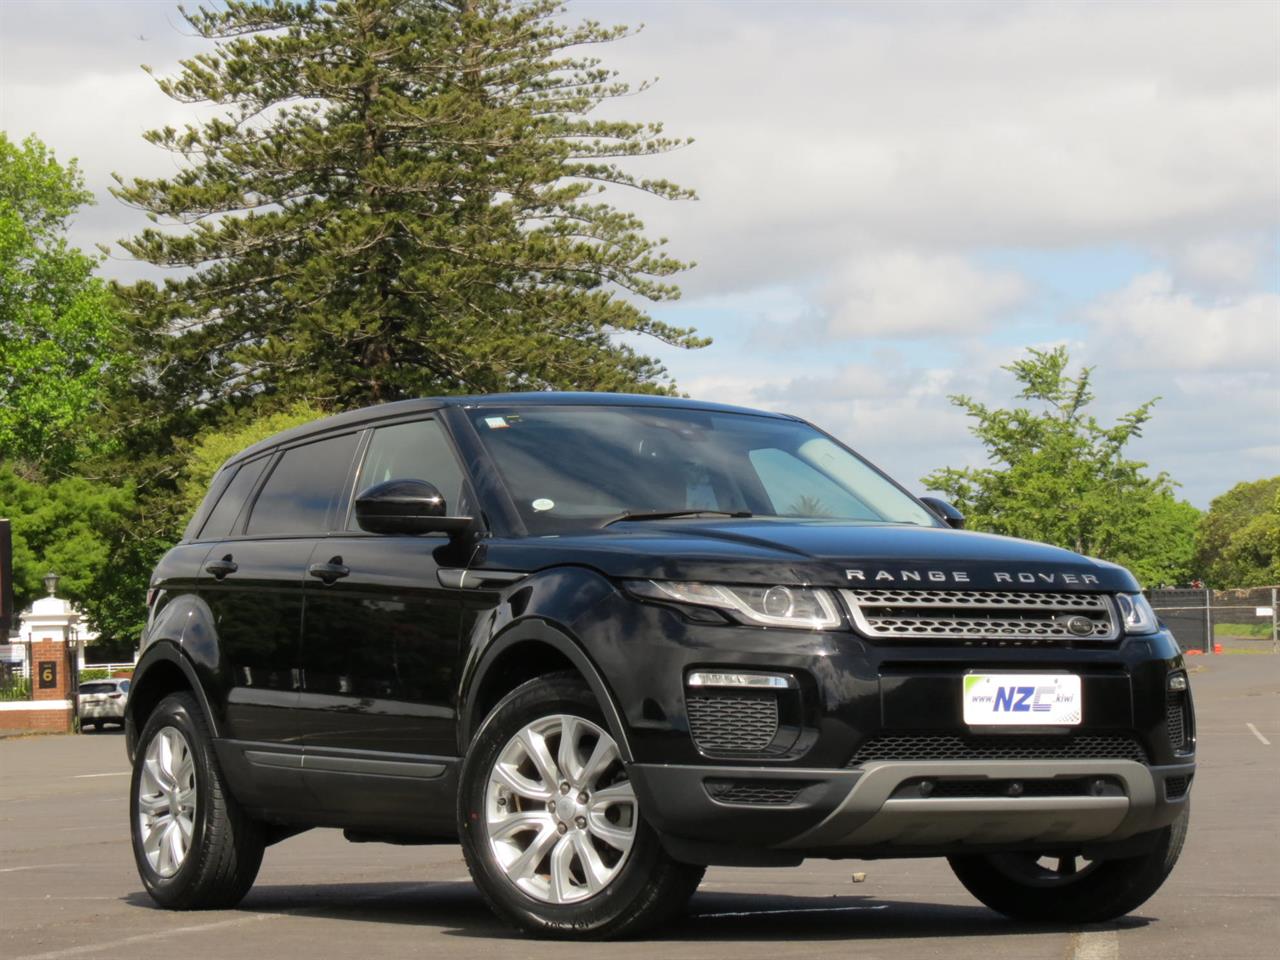 NZC best hot price for 2018 Land Rover Range Rover Evoque in Auckland